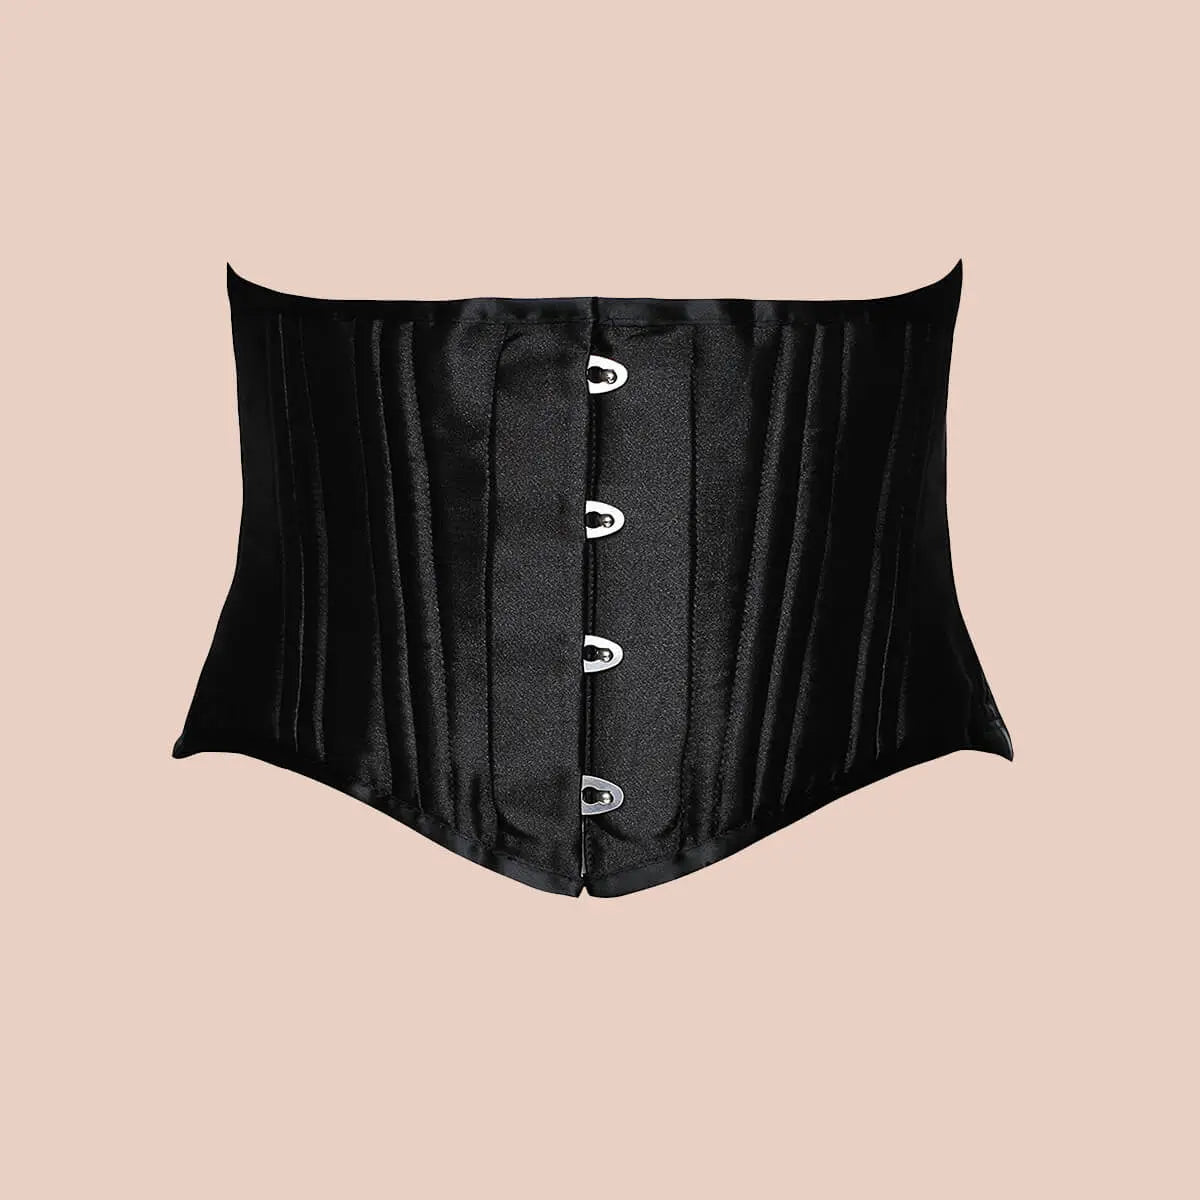 How Heavy Are Steel Boned Corsets?